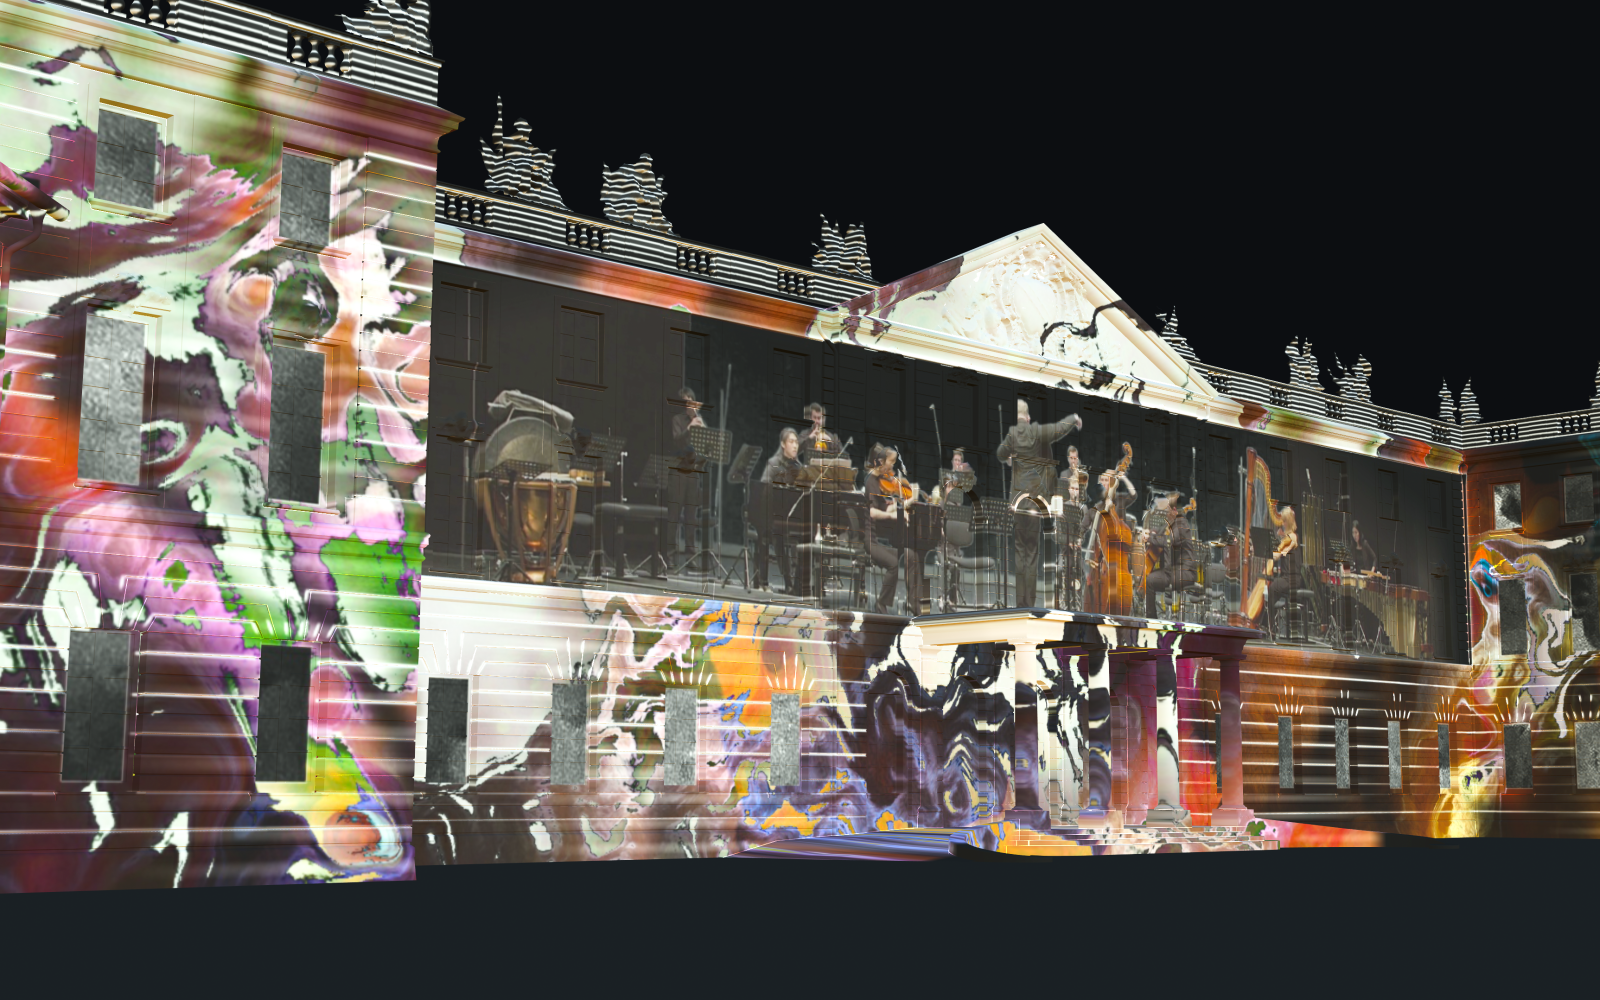 On the facade of the castle in Karlsruhe you can see a projection mapping that glows at night. The mapping shows colorful swirls of color with an orchestra playing in the middle.